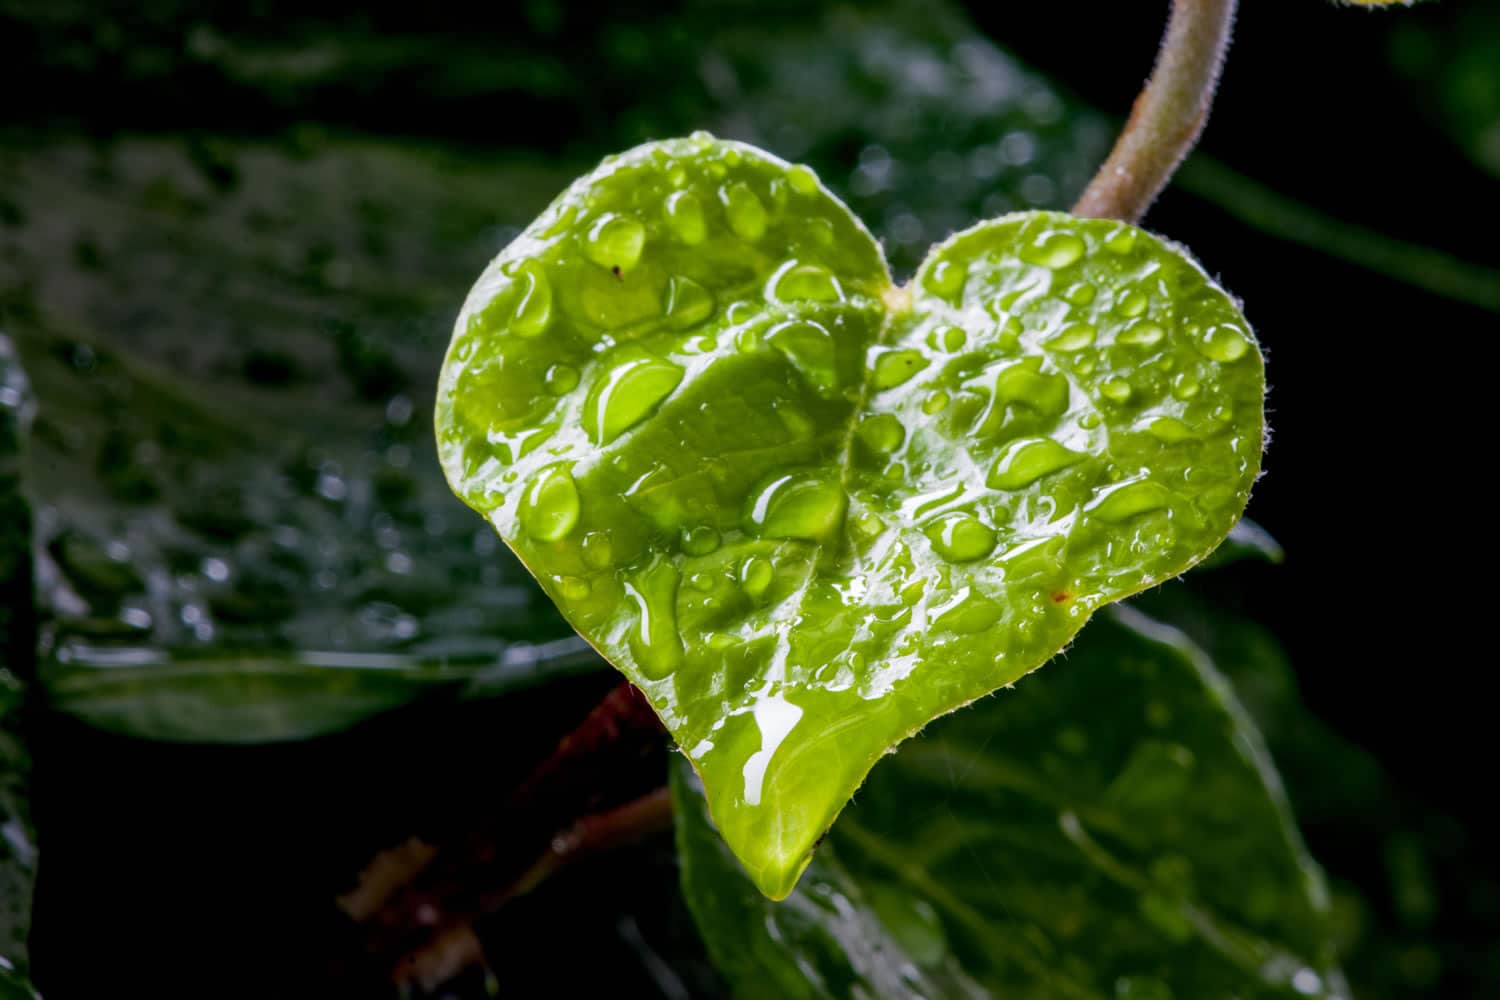 Heart-shaped leaf with water droplets